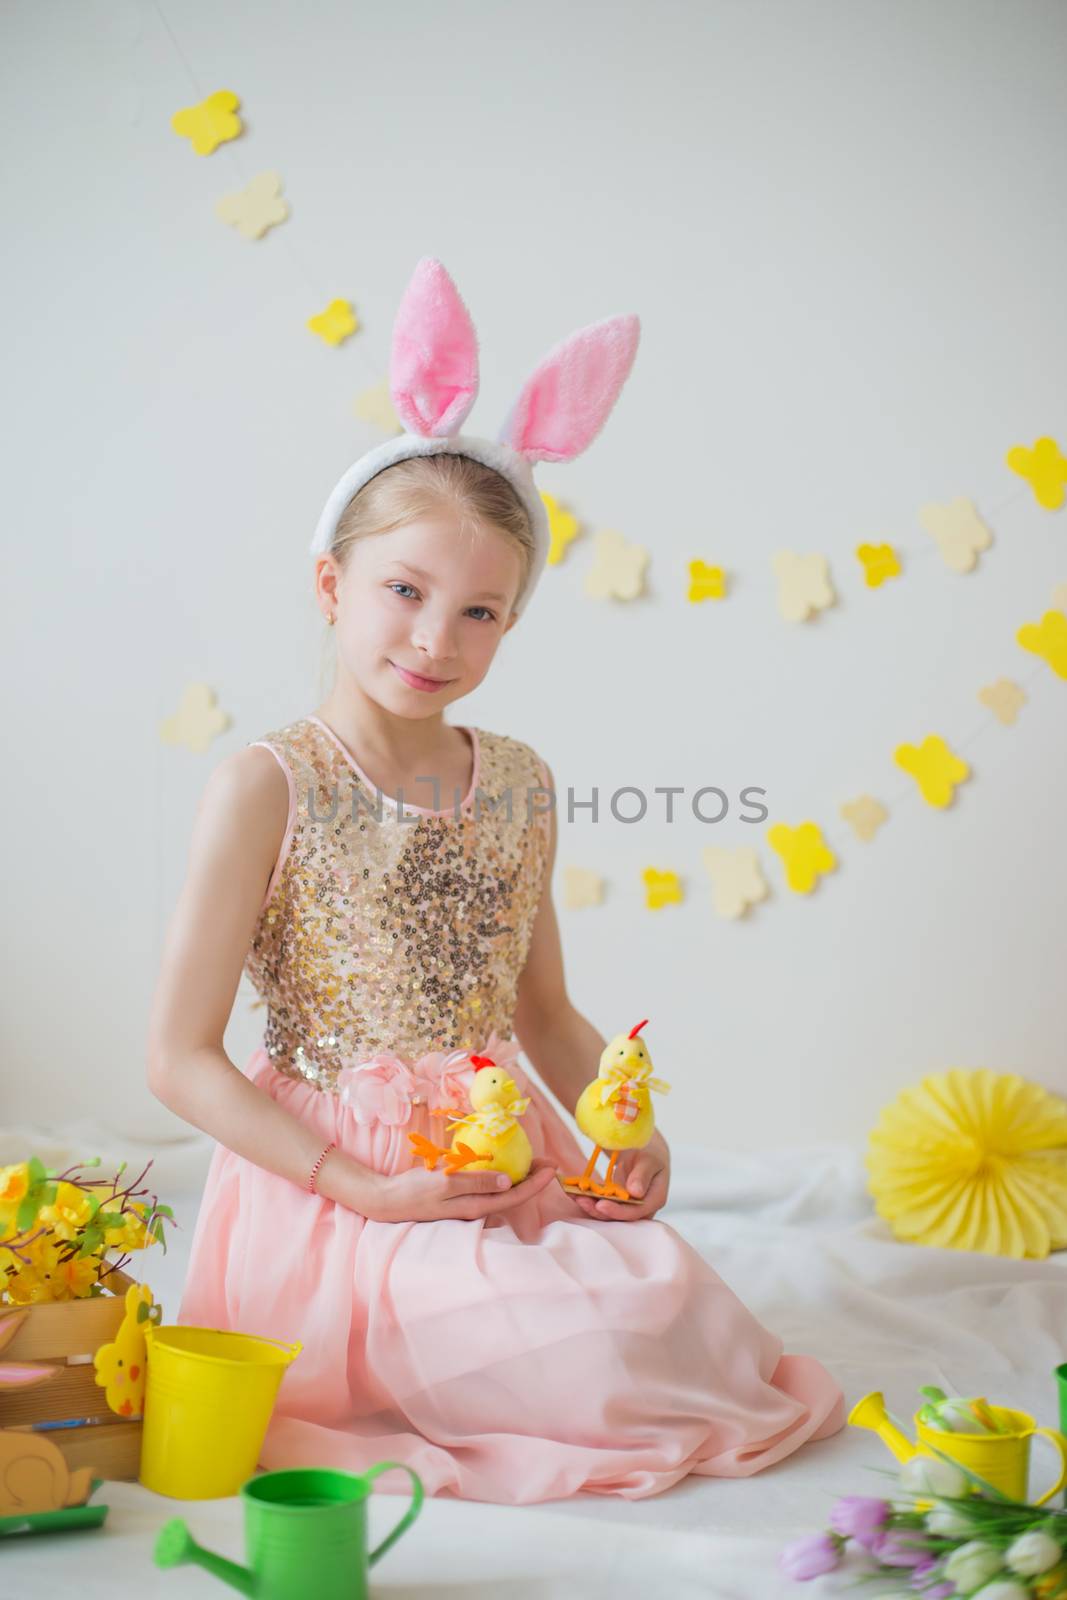 Girl with bunny ears painting eggs, Easter decoration by Angel_a